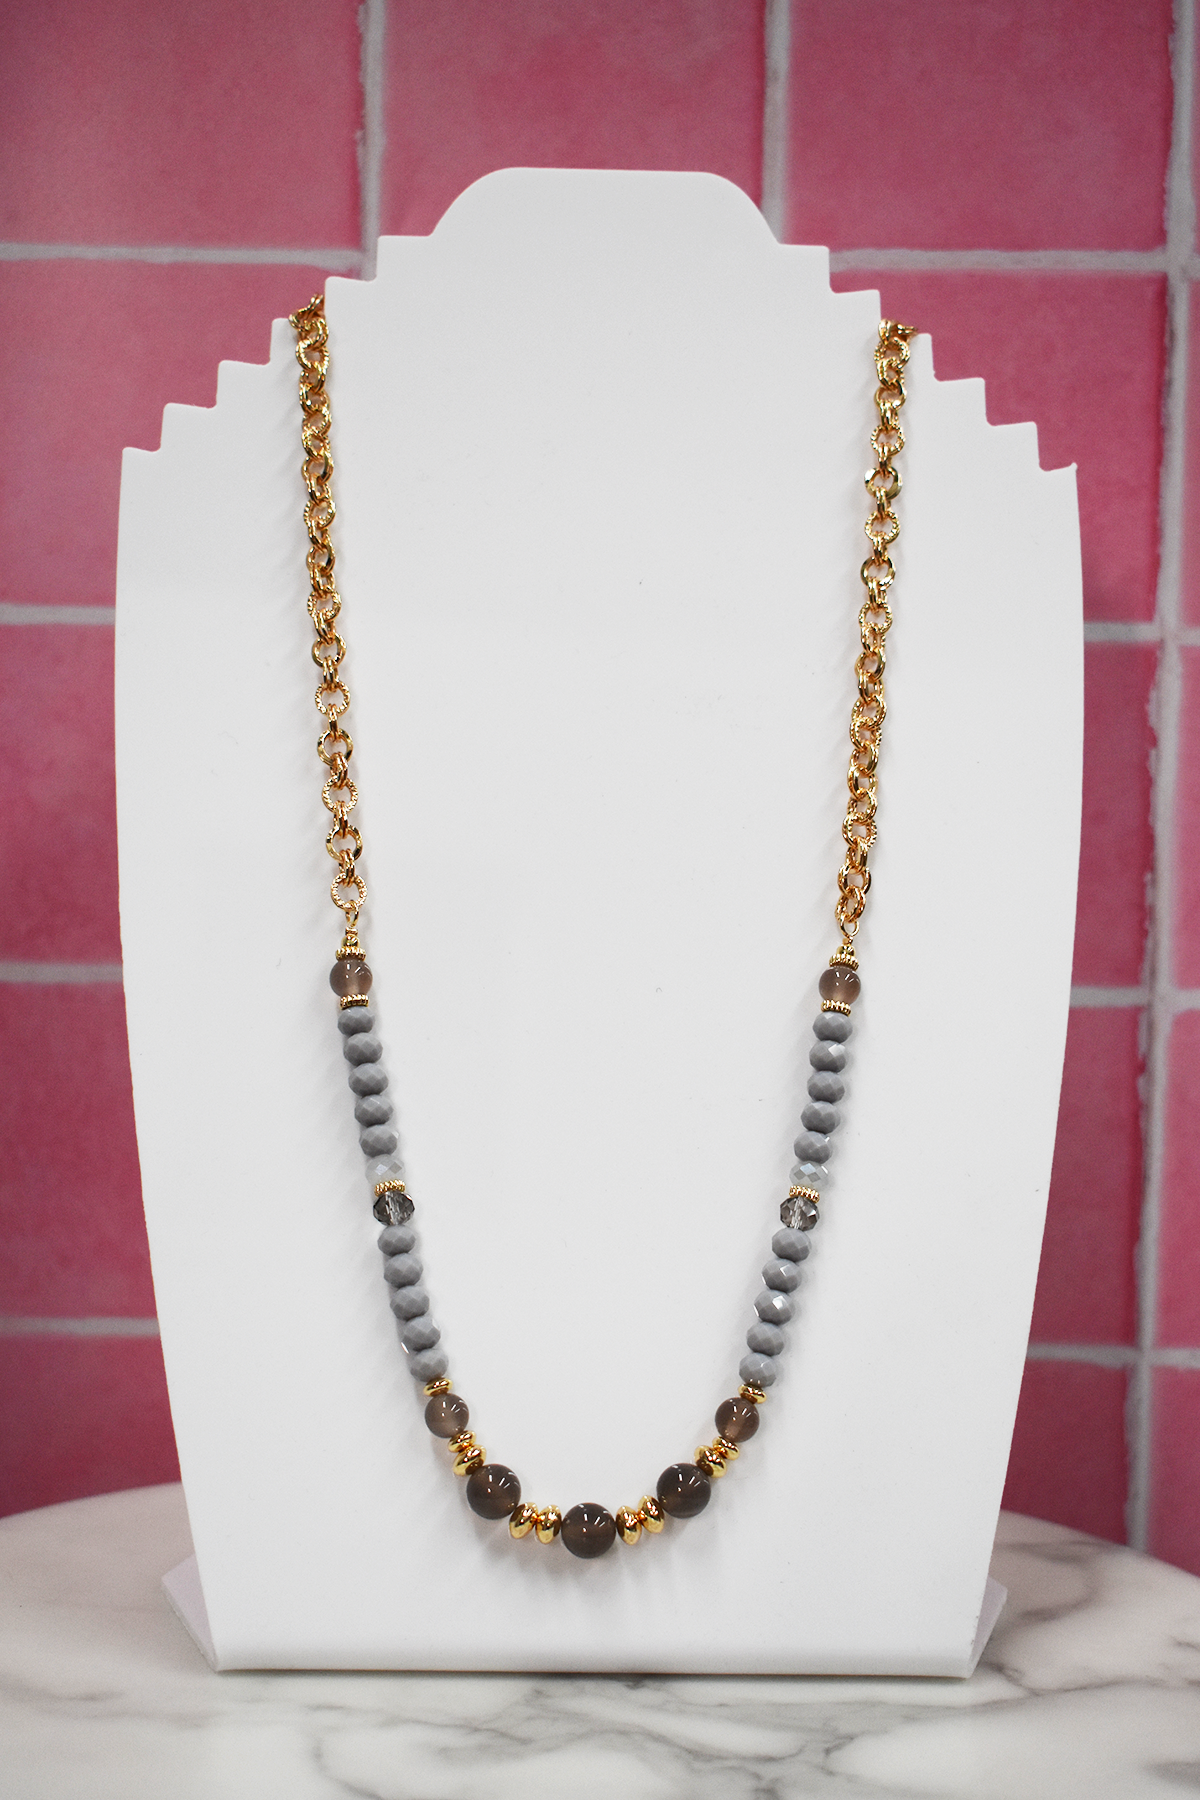 Long Bead and Chain Necklace in Grey